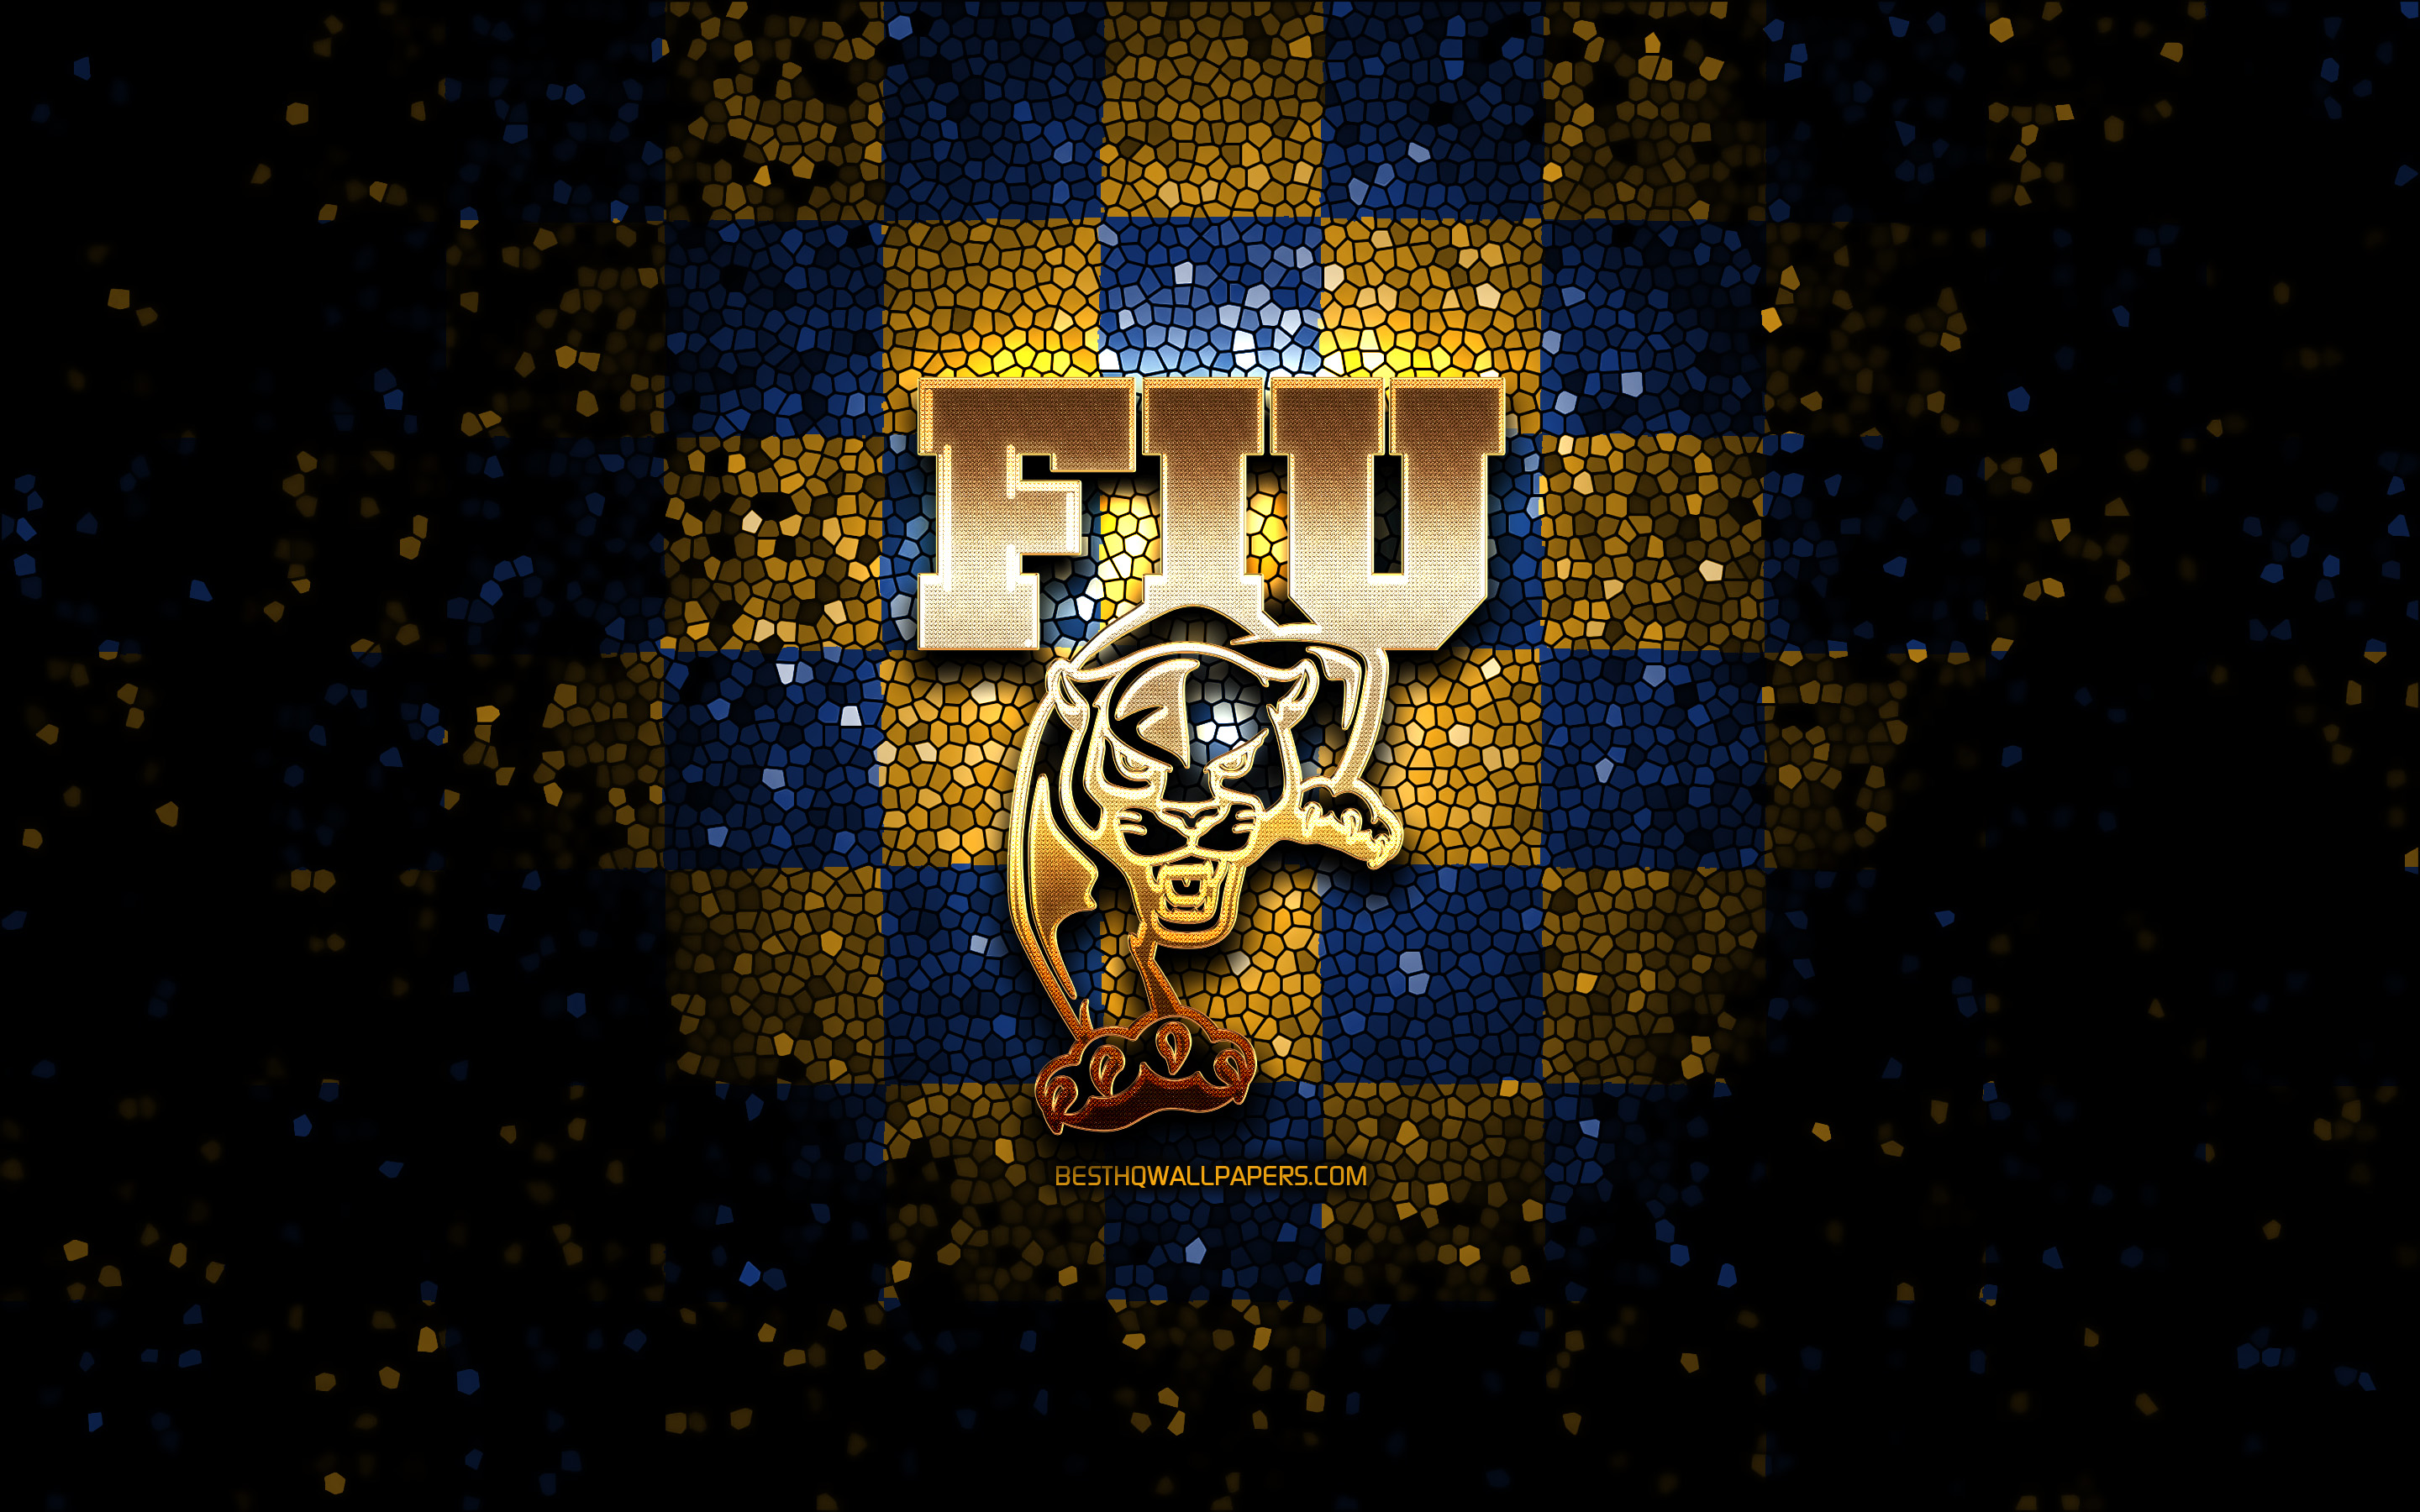 Download wallpaper FIU Panthers, glitter logo, NCAA, blue yellow checkered background, USA, american football team, FIU Panthers logo, mosaic art, american football, America for desktop with resolution 2880x1800. High Quality HD picture